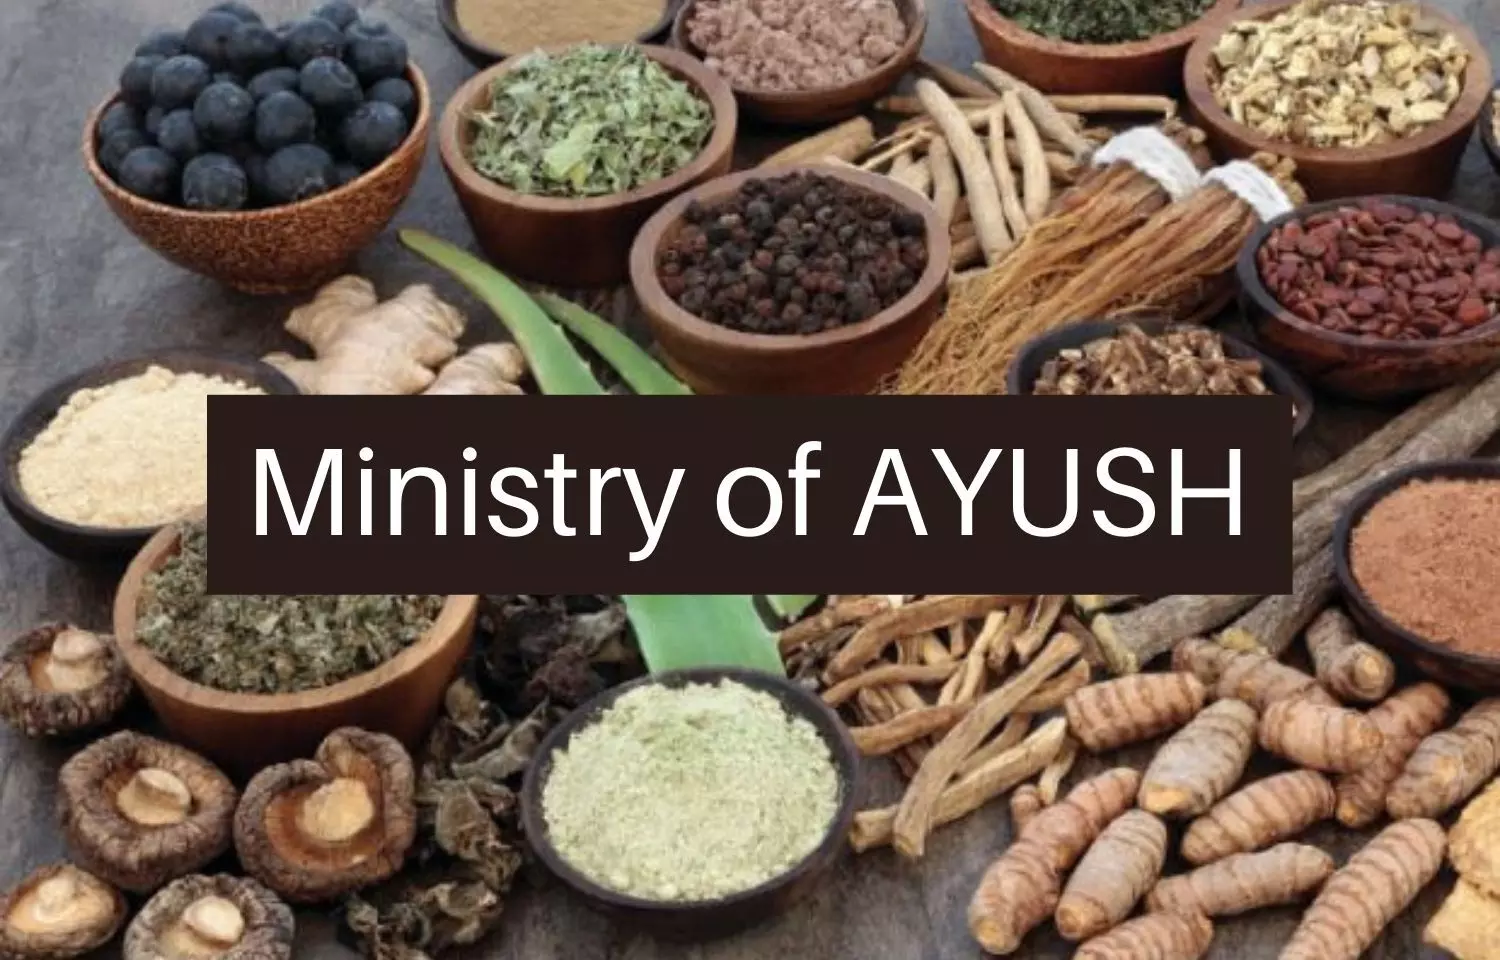 Ministry of AYUSH announces video making competition on theme Har Din Har Ghar Ayurveda